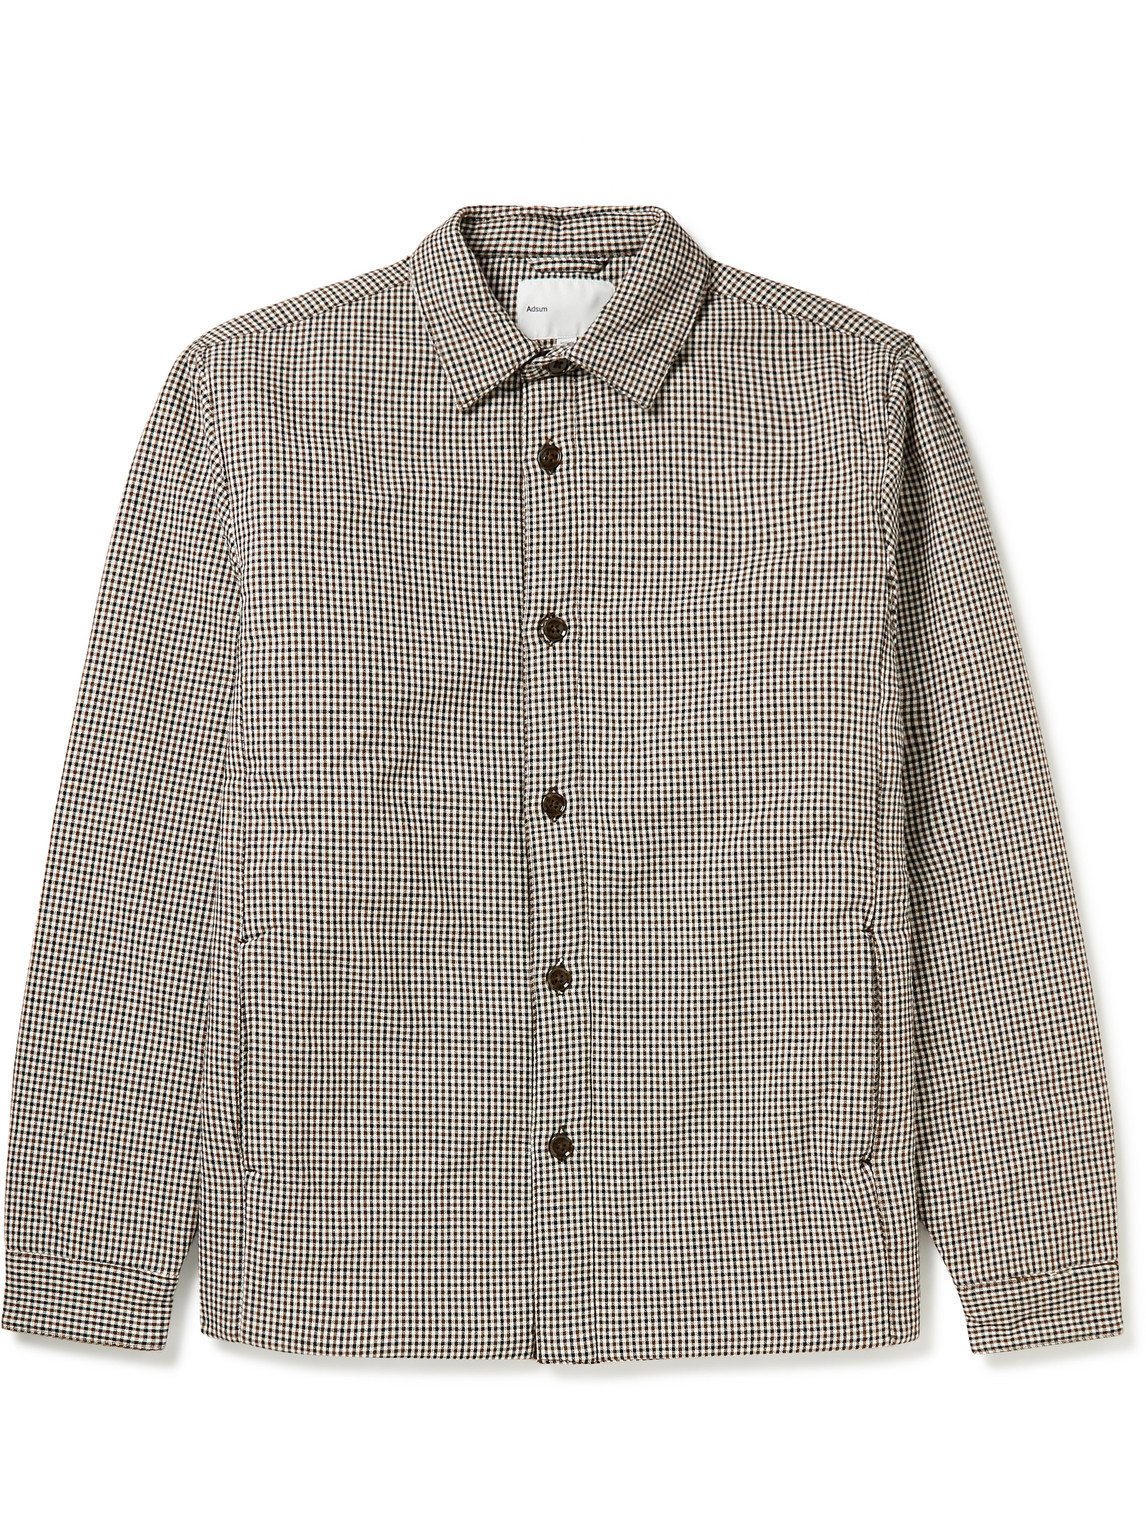 Adsum Club Padded Checked Cotton Shirt Jacket In Neutrals